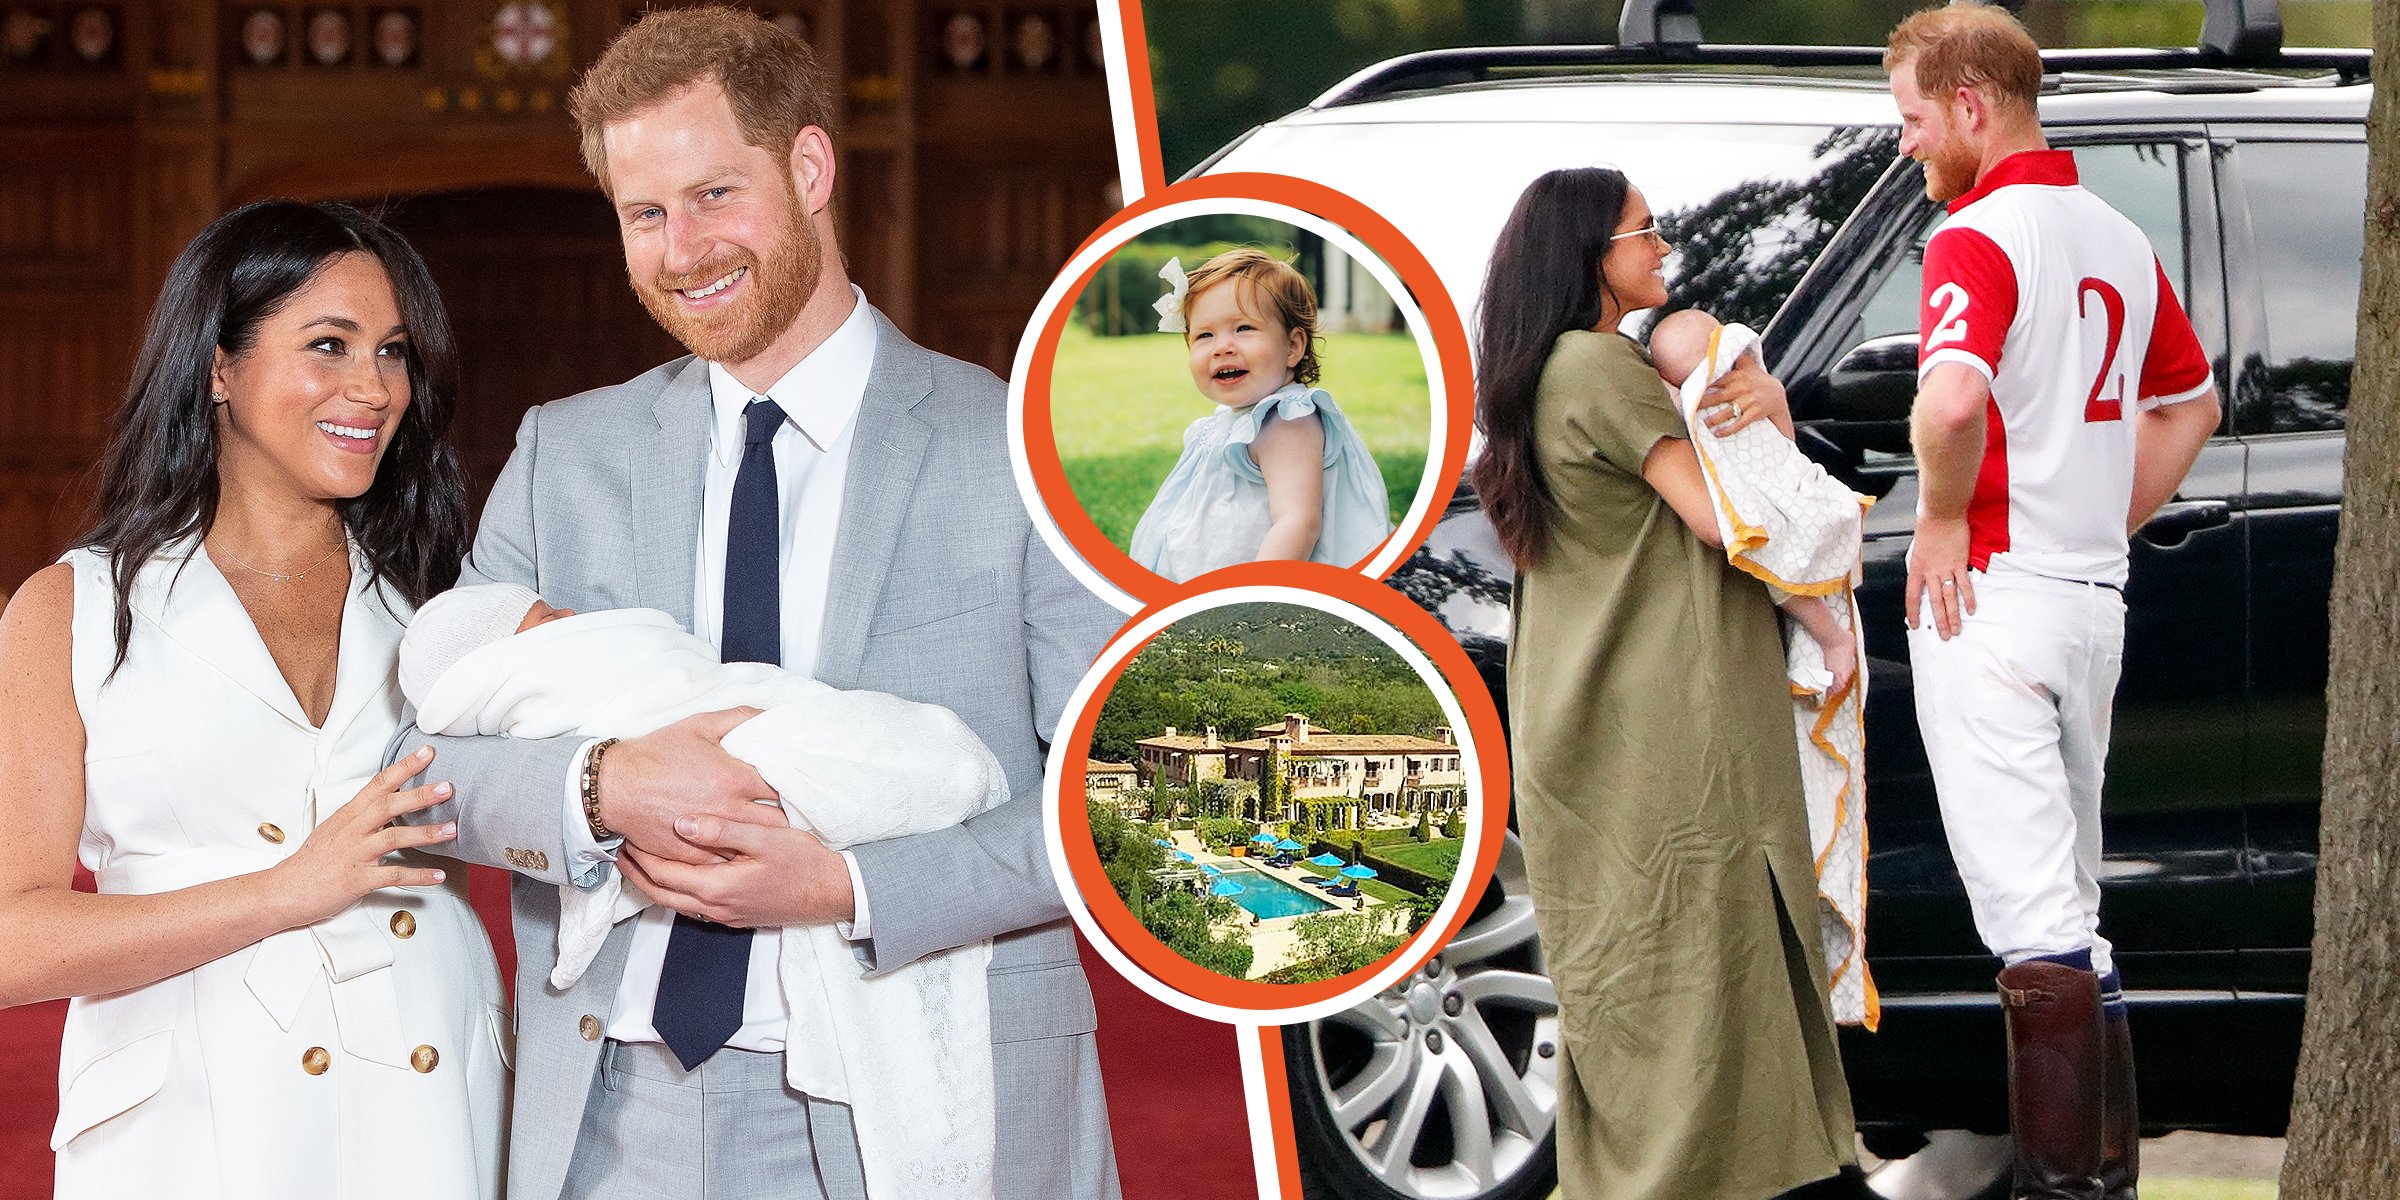 Meghan Markle and Prince Harry. | Meghan Markle, Prince Harry and their children Archie and Lilibet. | Meghan Markle and Prince Harry's home.| Source: Twitter.com/Daily Mail. | Getty Images 